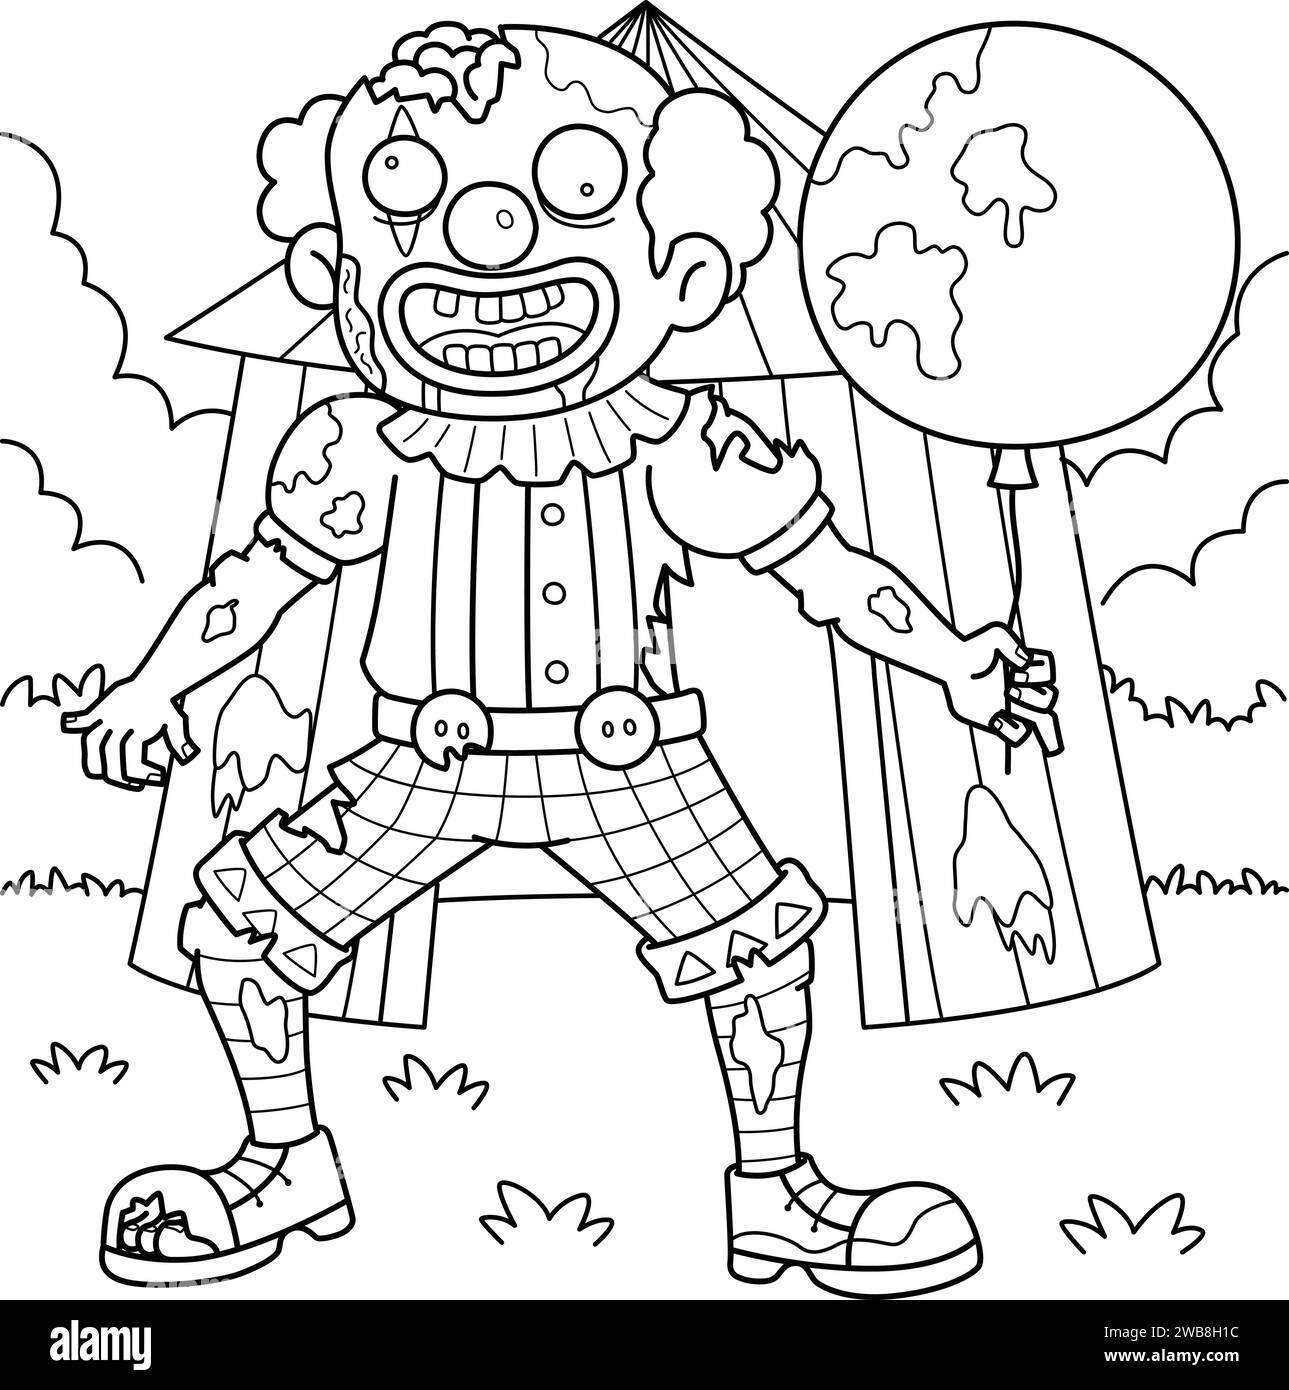 Zombie Clown Coloring Page for Kids Stock Vector